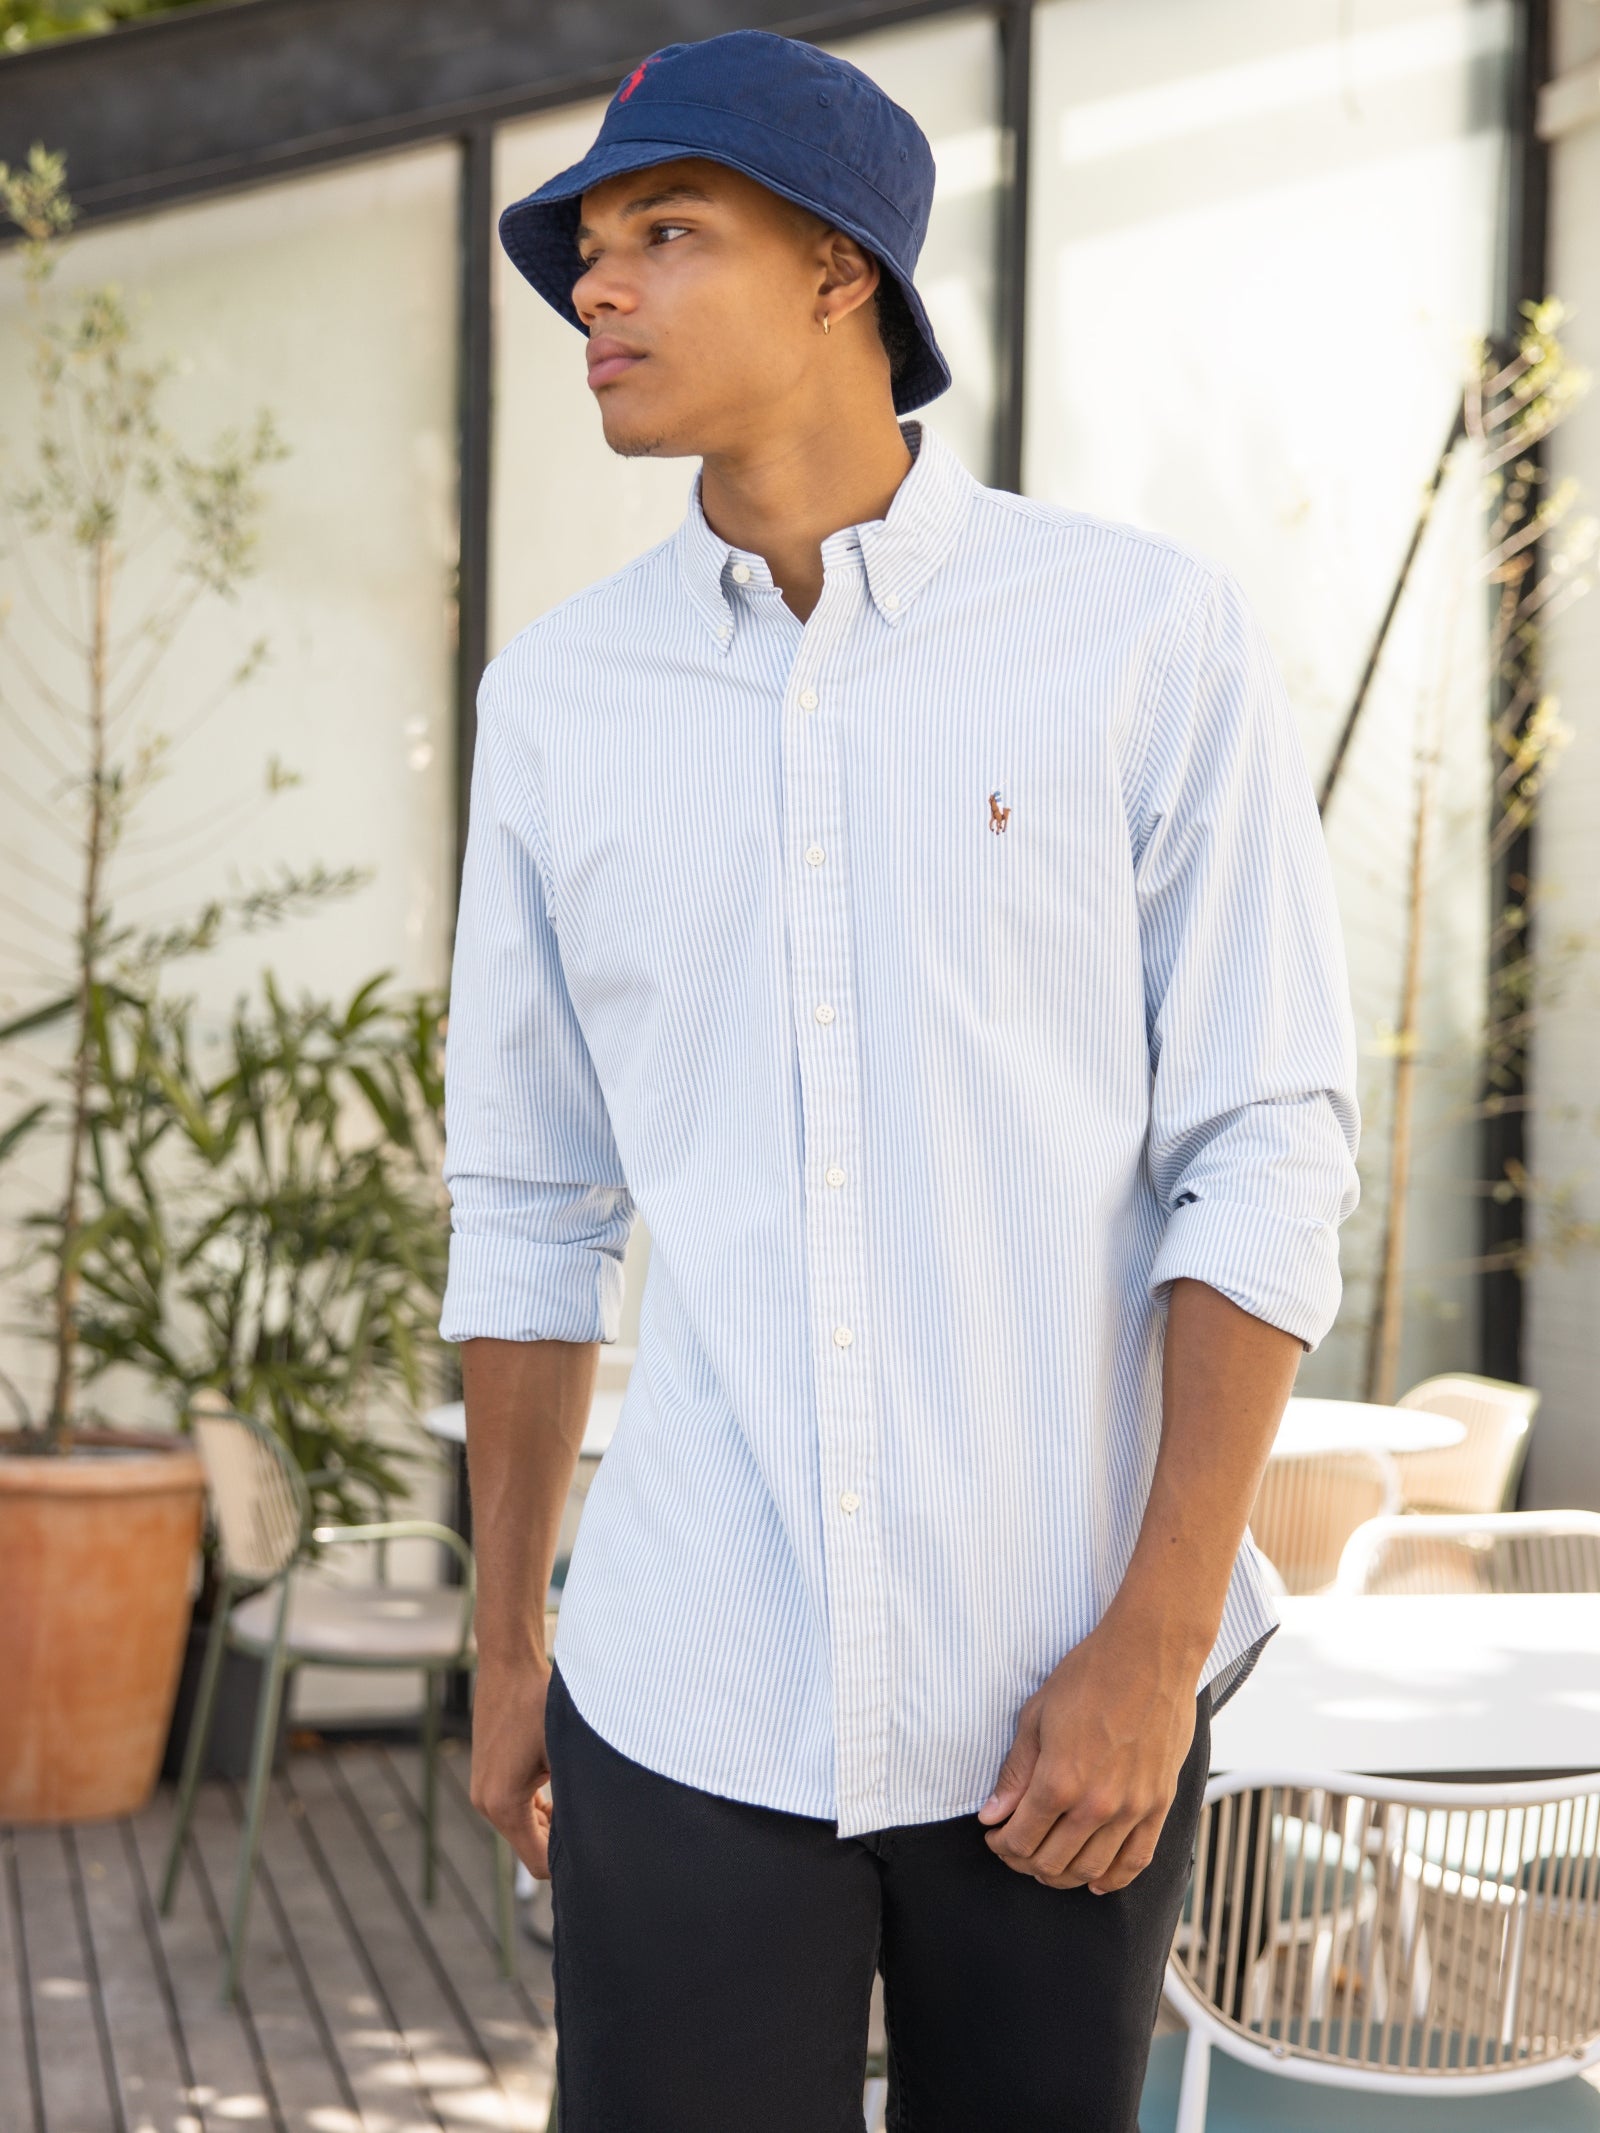 Long Sleeve Button Up Shirt in Blue & White